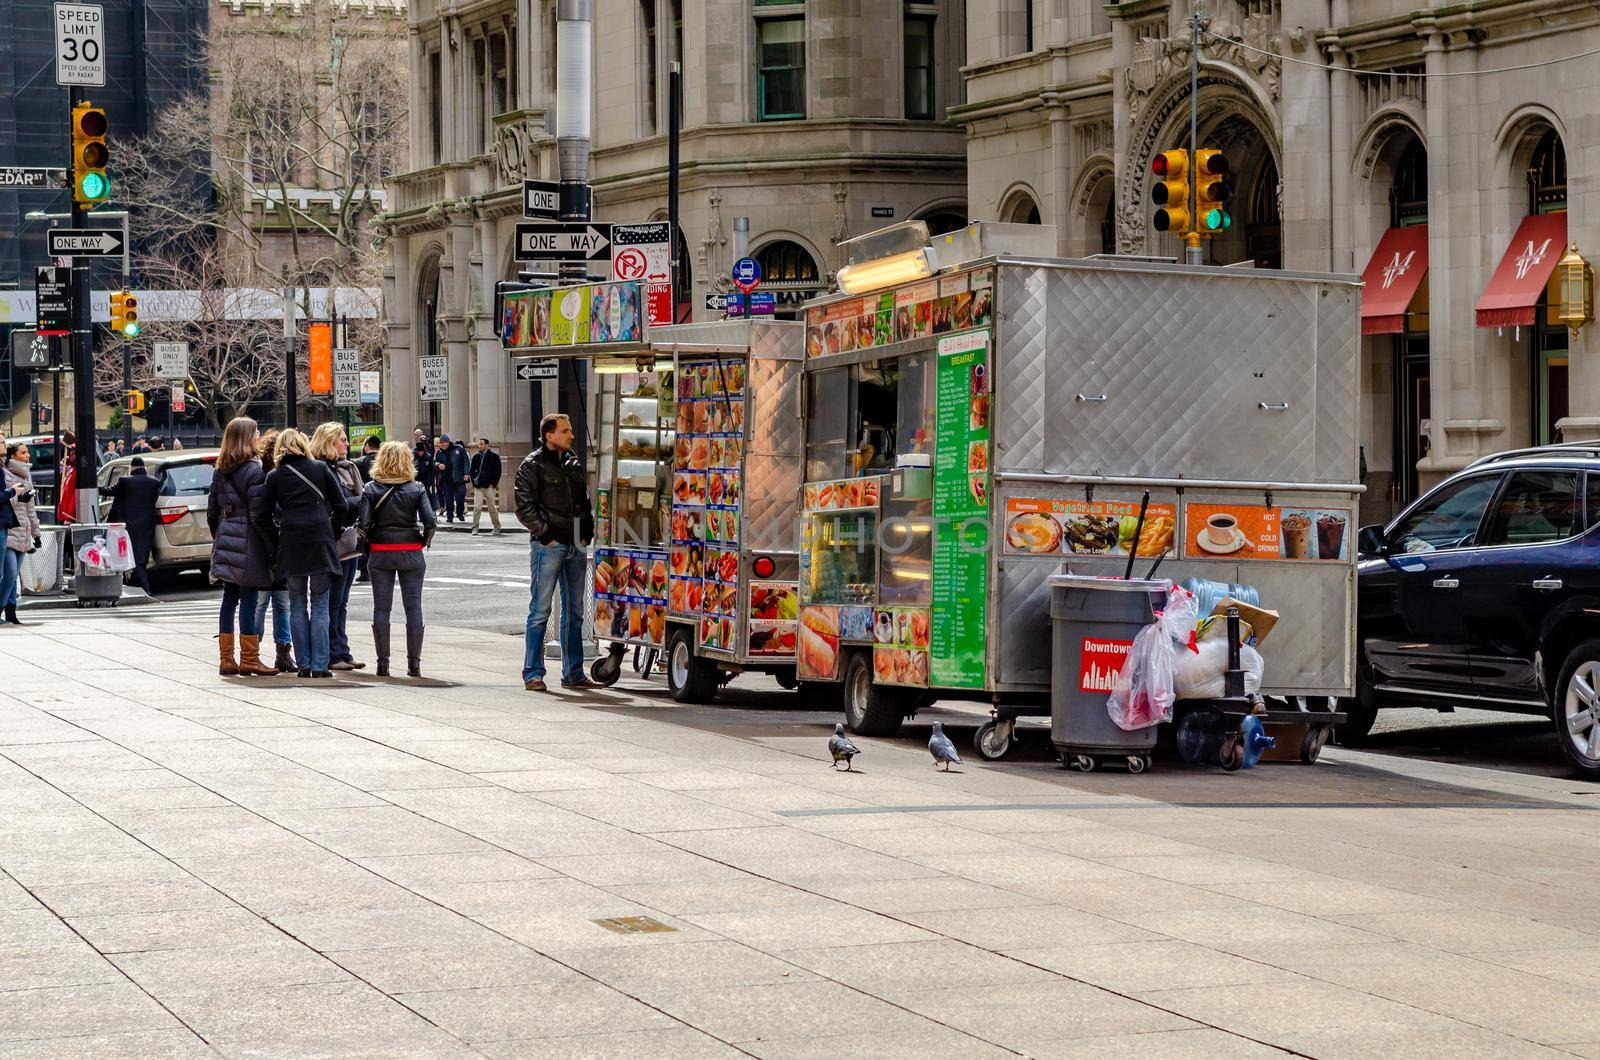 Two different Street Food Trucks in Manhattan on a sidewalk, People waiting in line to get food, New York City, during winter, horizontal